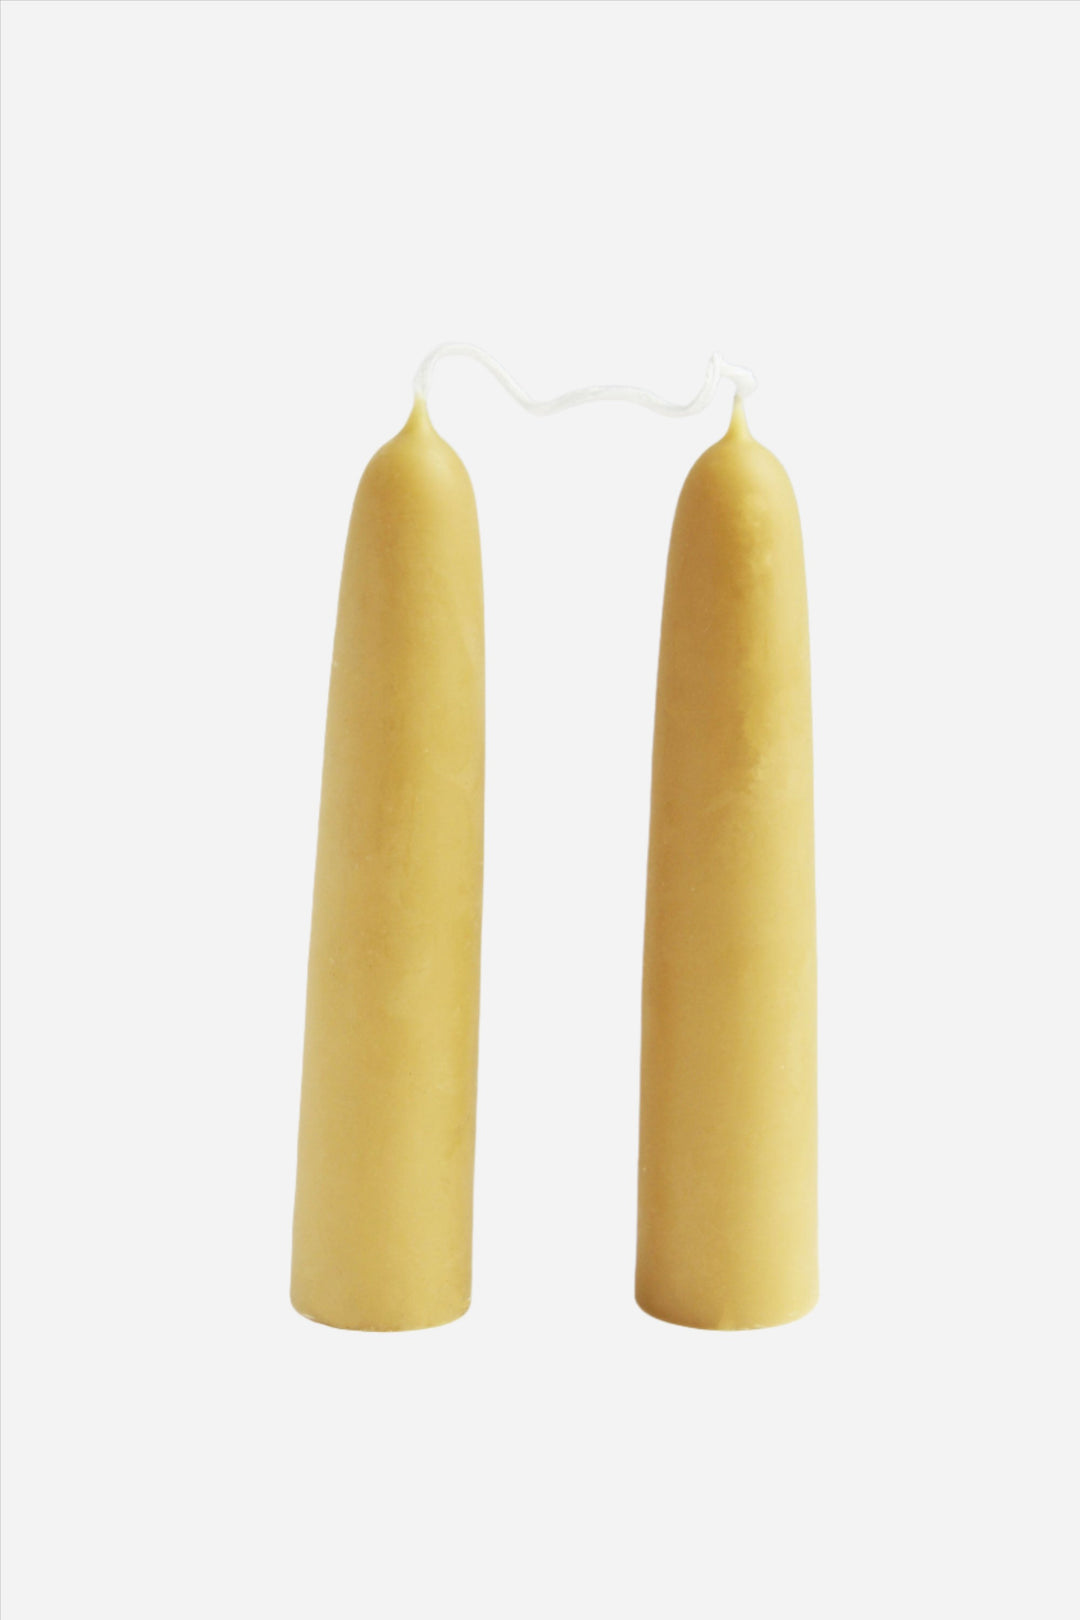 Pair of Giant Stumpy Beeswax Candles - Domestic Science Home